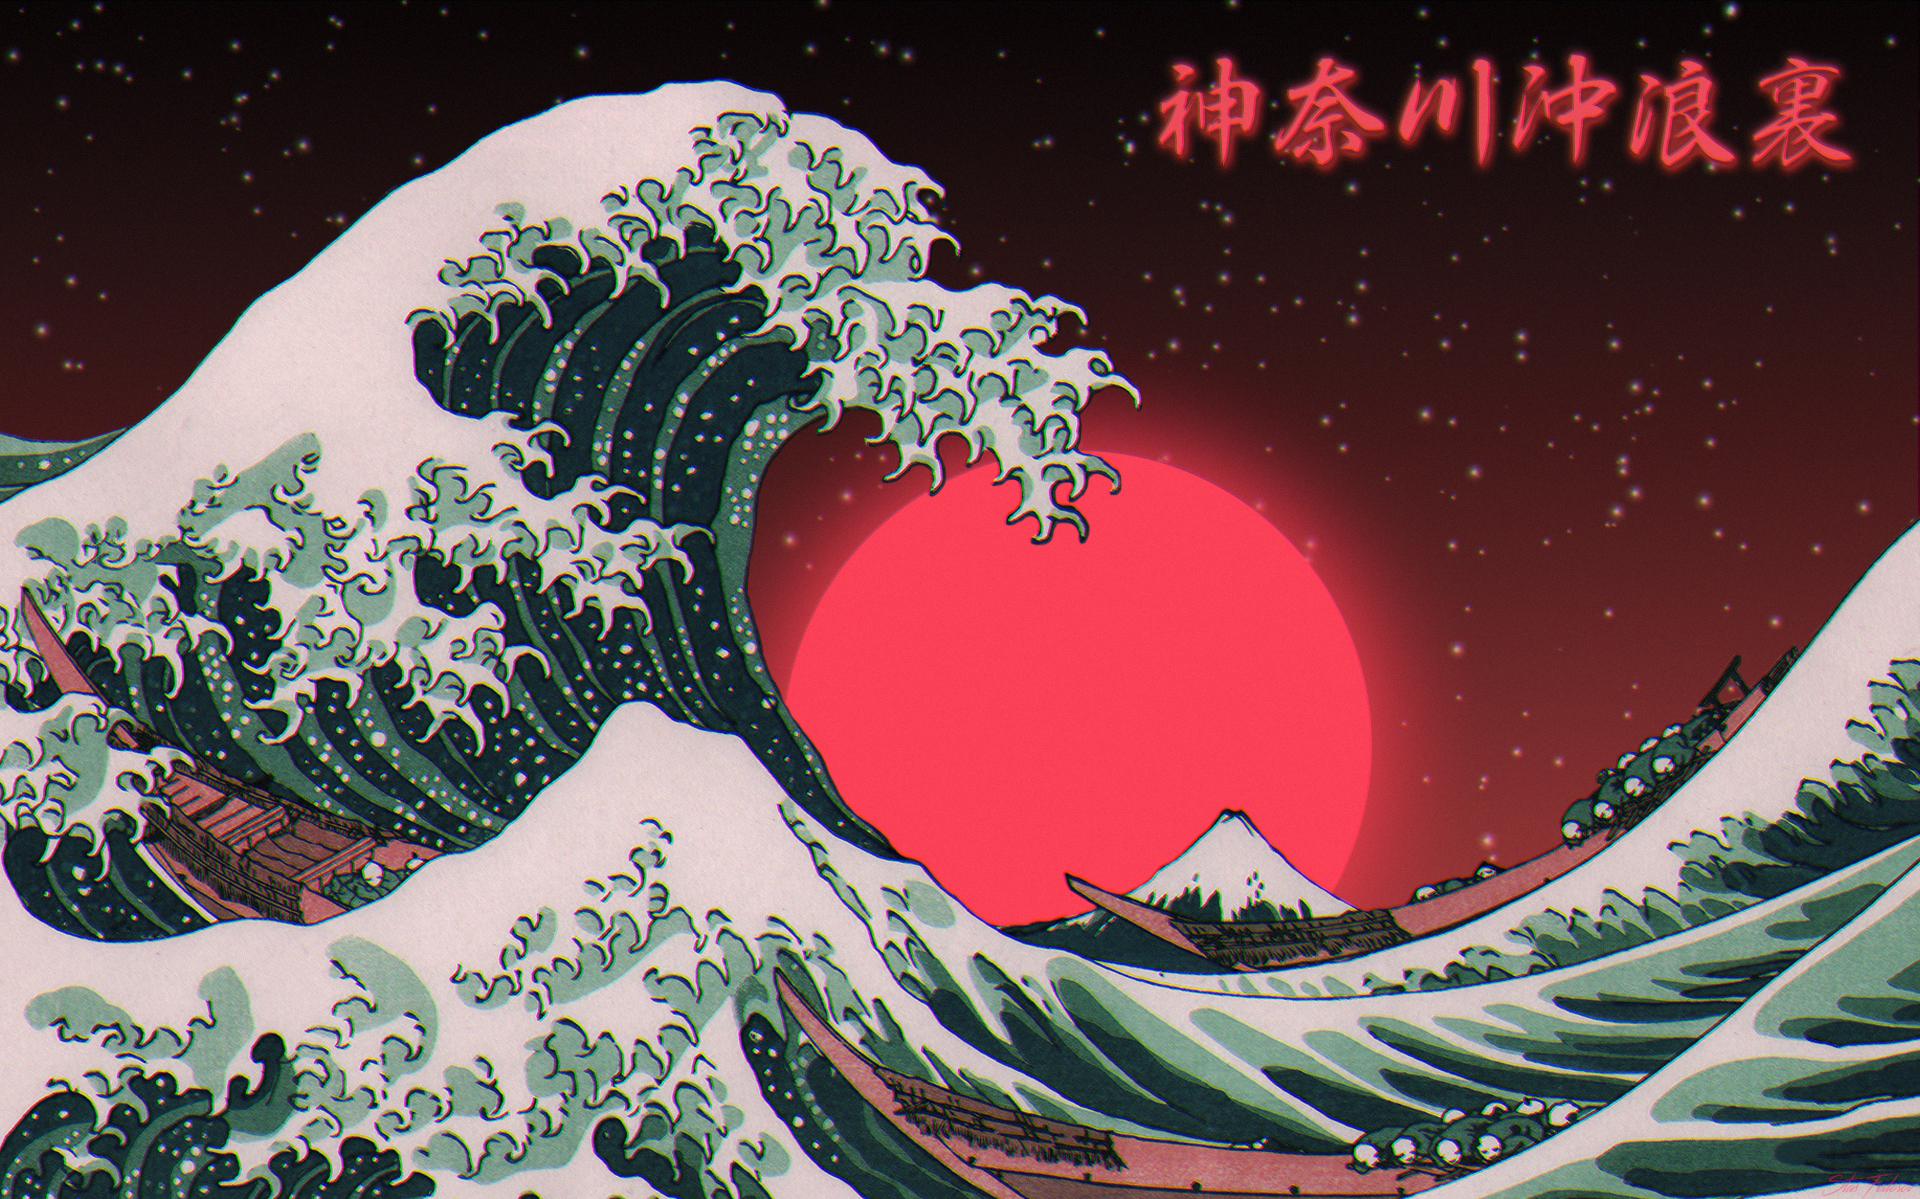 Photoshop Digital Art Typography Japan The Great Wave